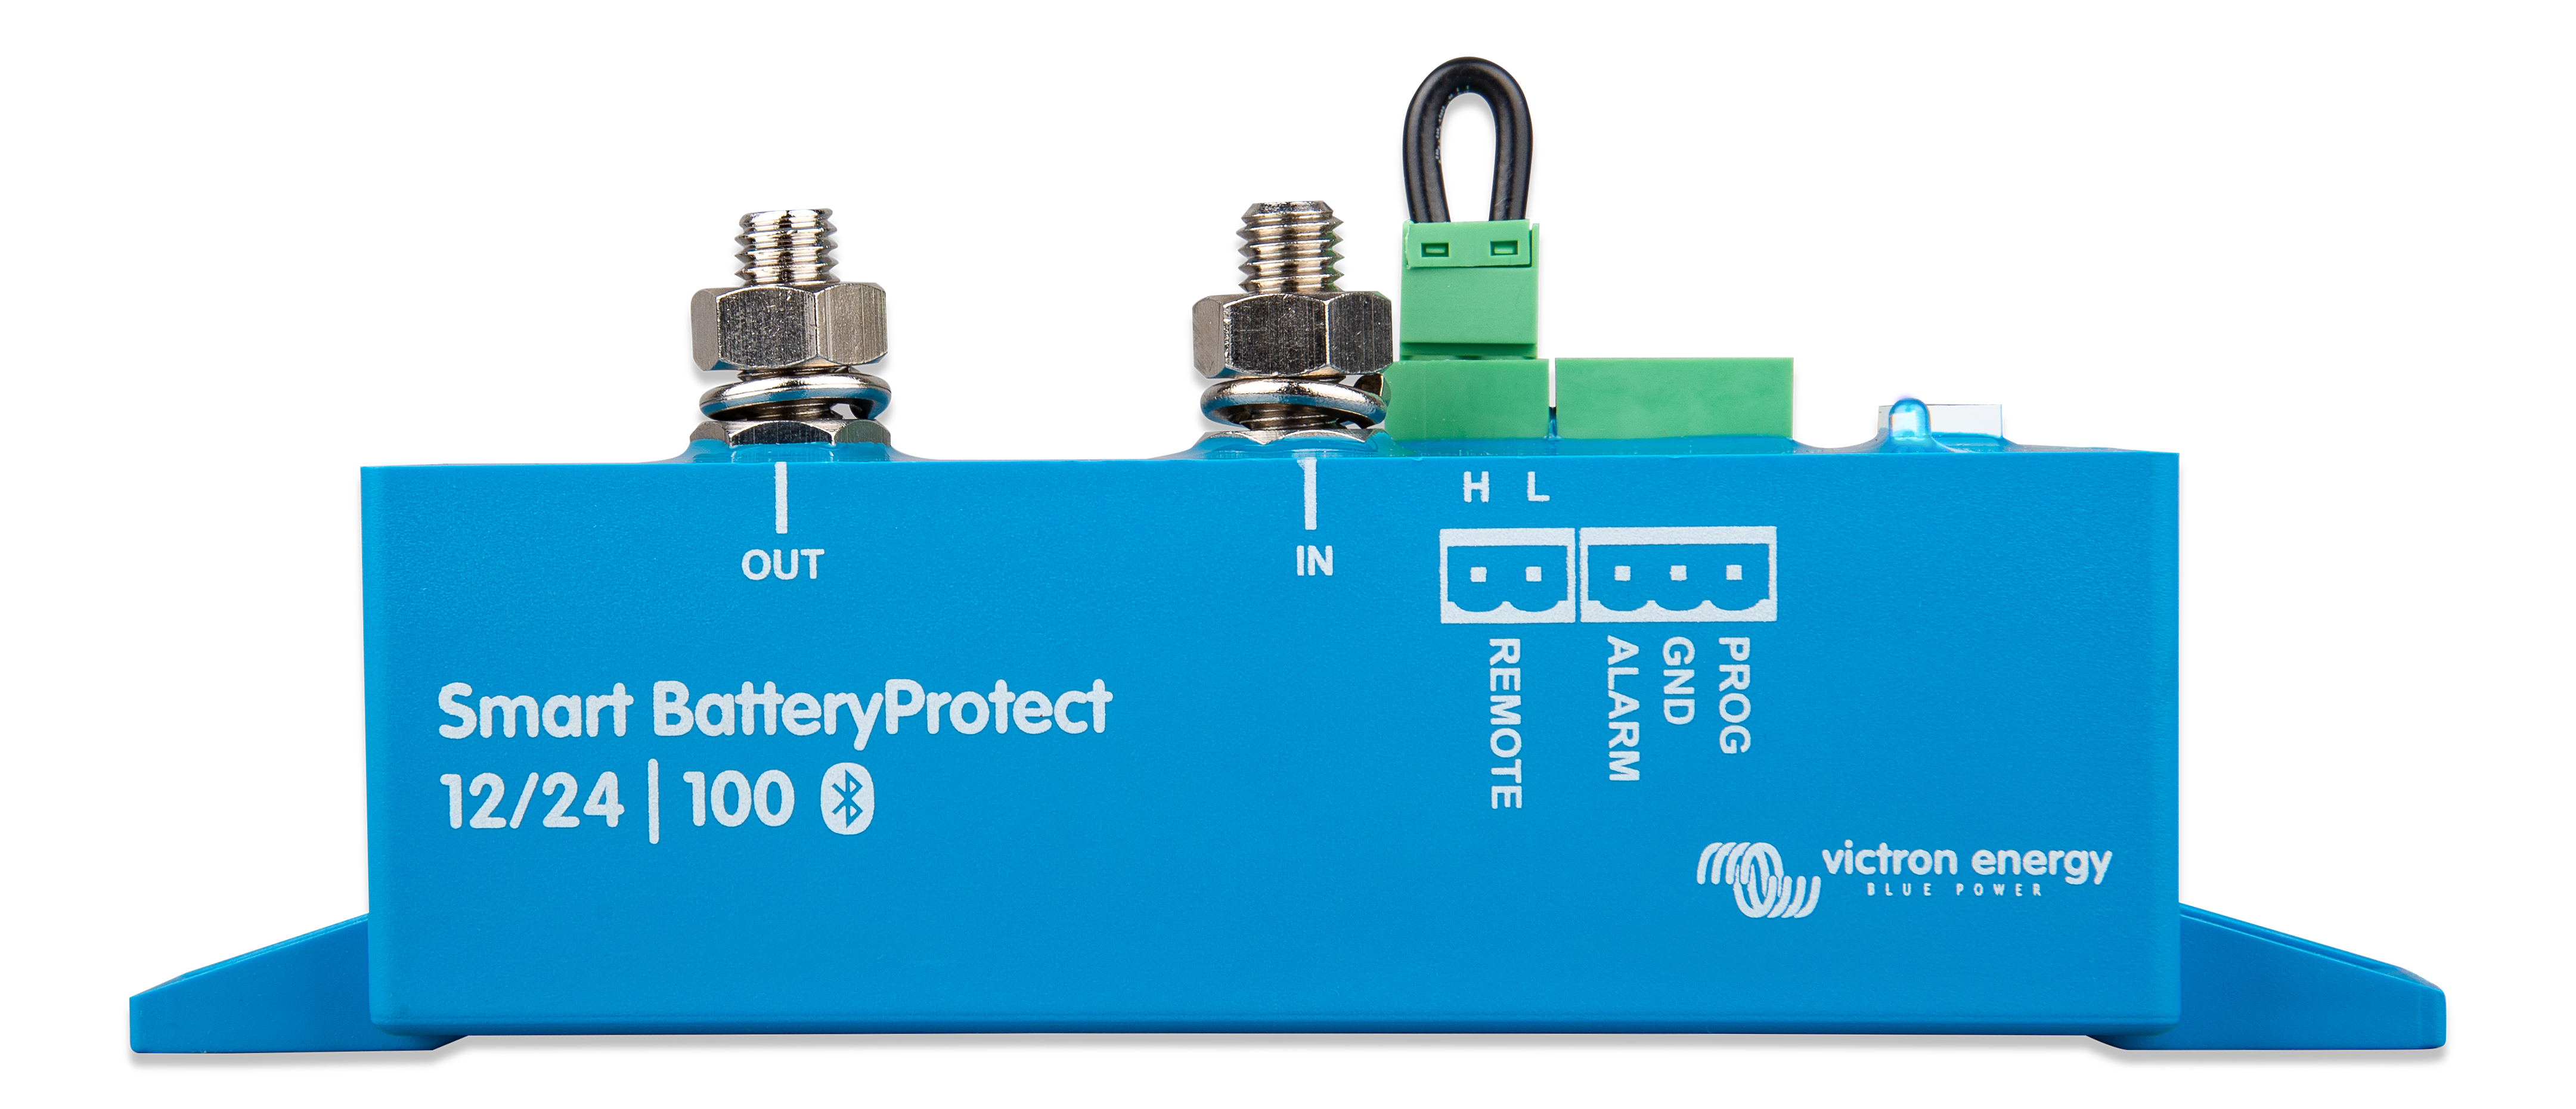 Smart BatteryProtect. Prices from –